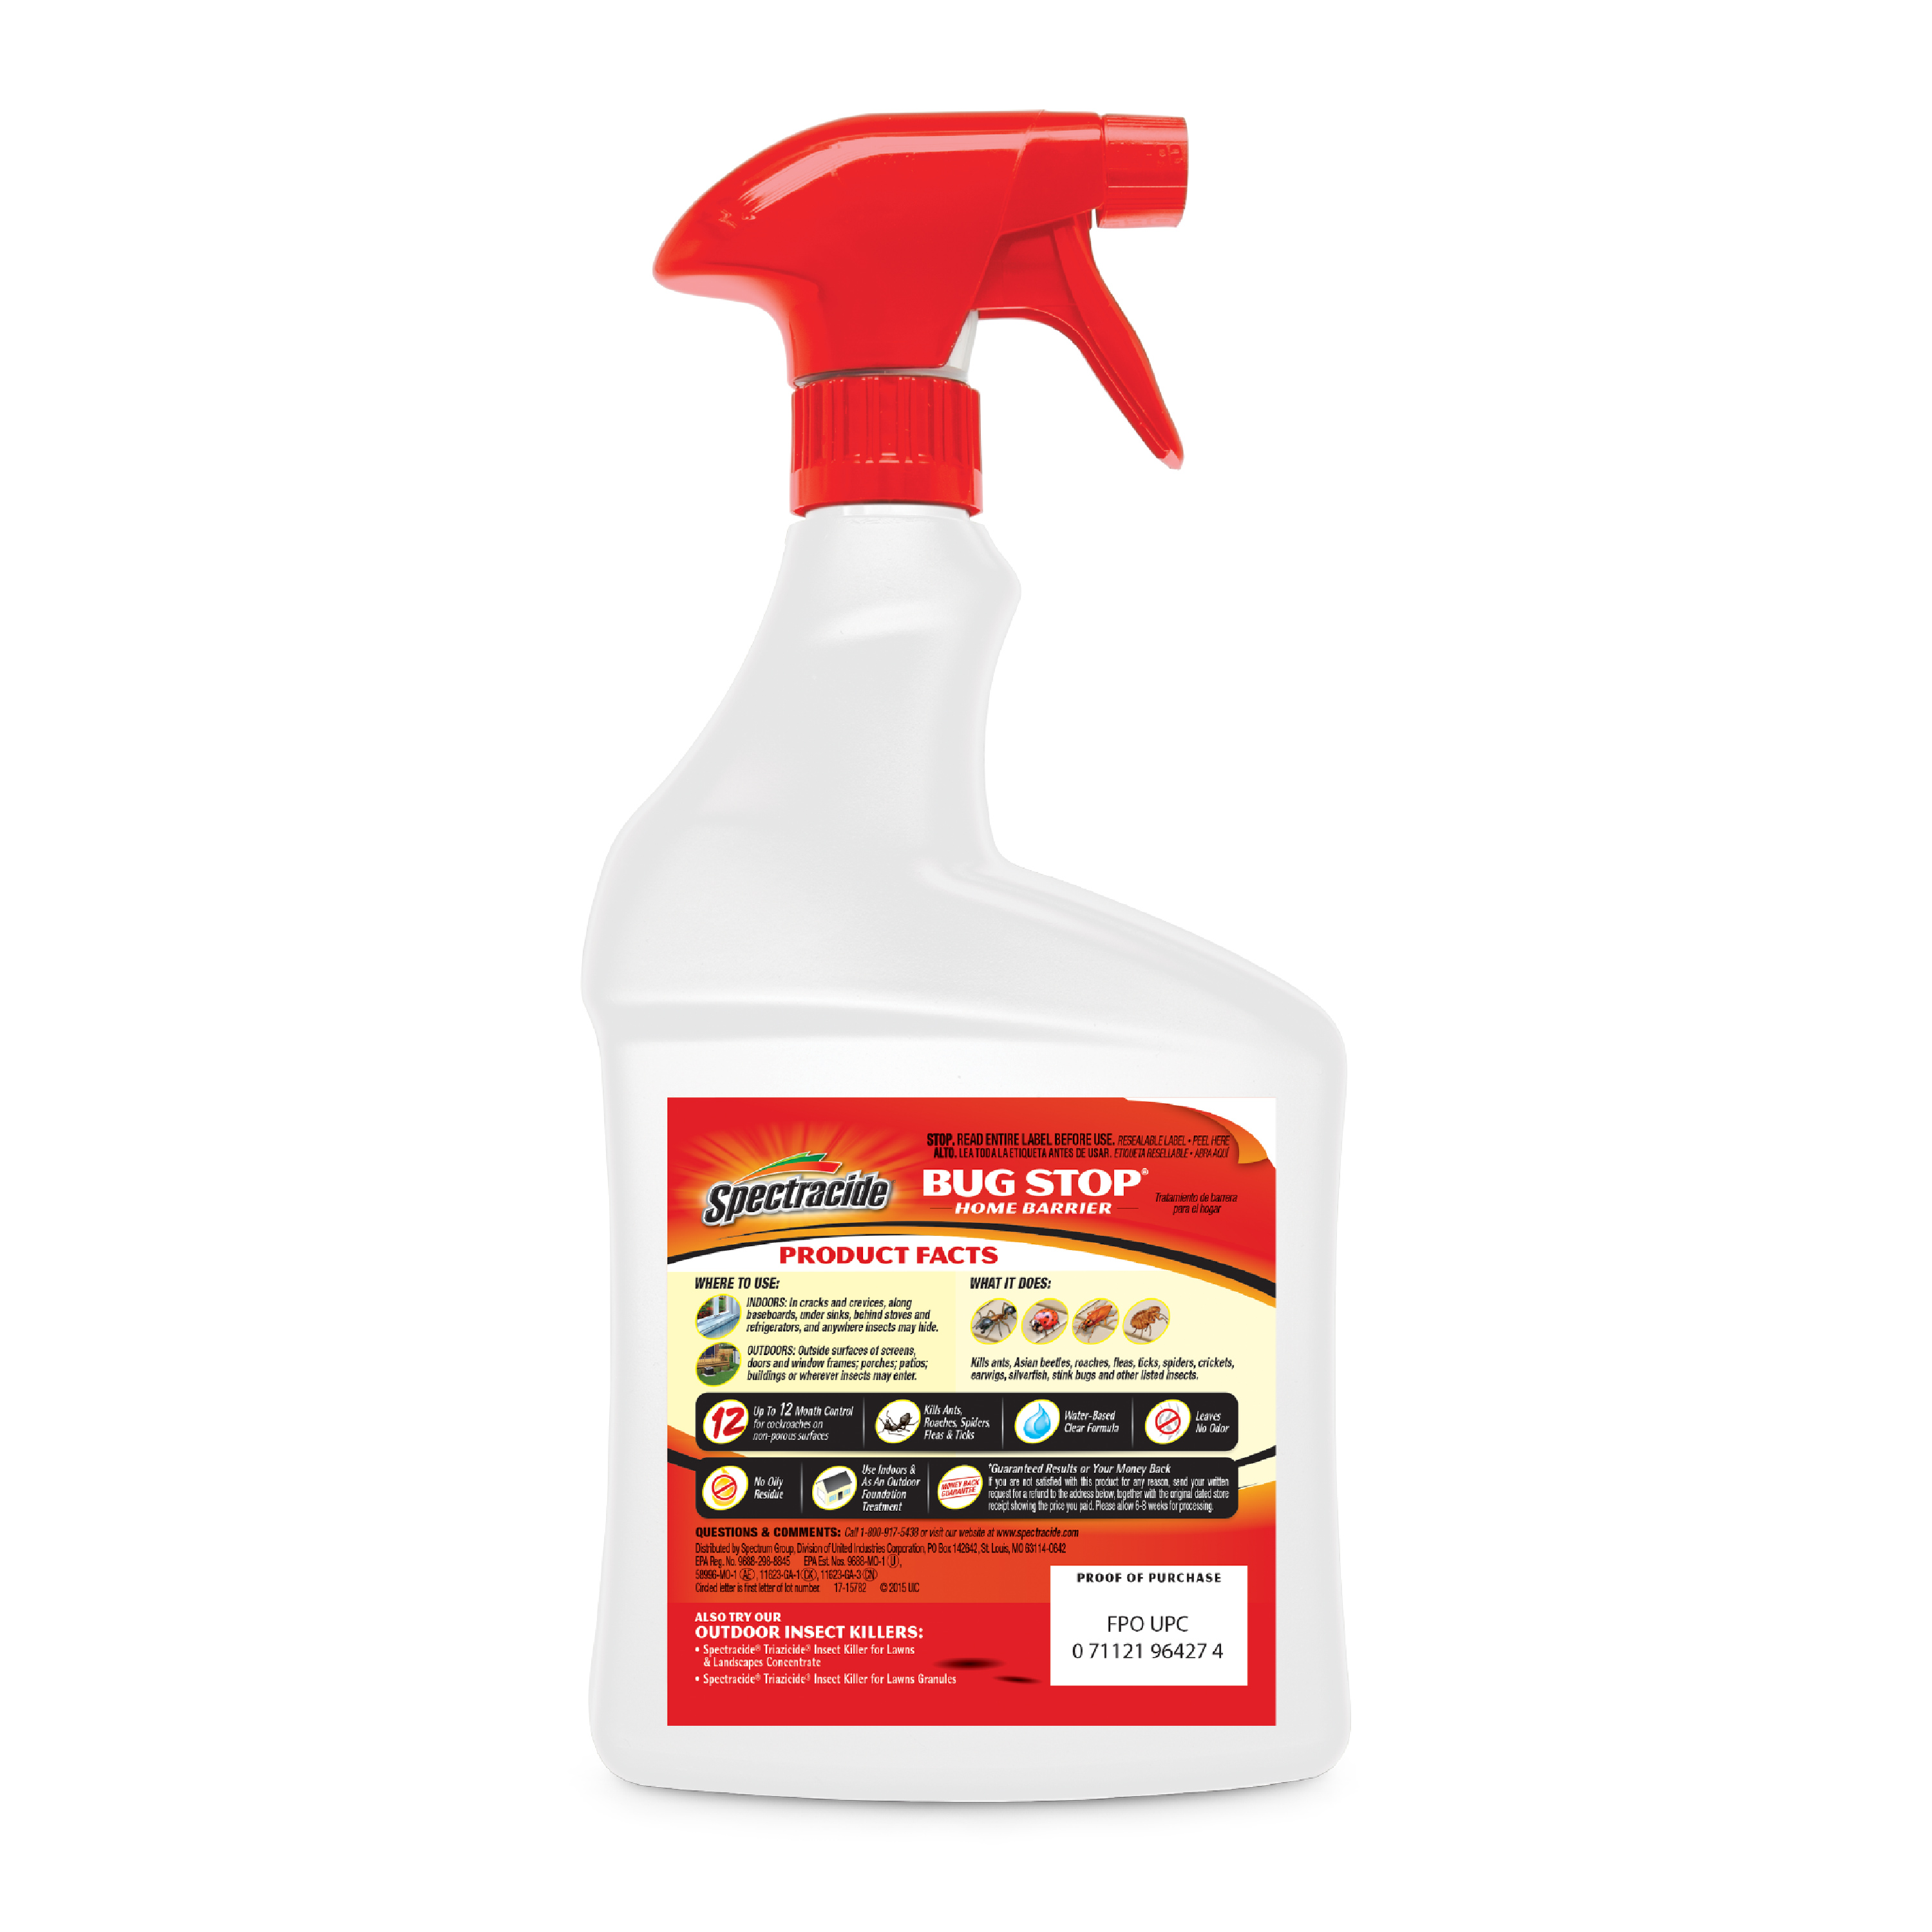 Spectracide Bug Stop Home Barrier, Kills Ants, Roaches, Spiders, Insect Control, 32 fl oz, Spray - image 3 of 11